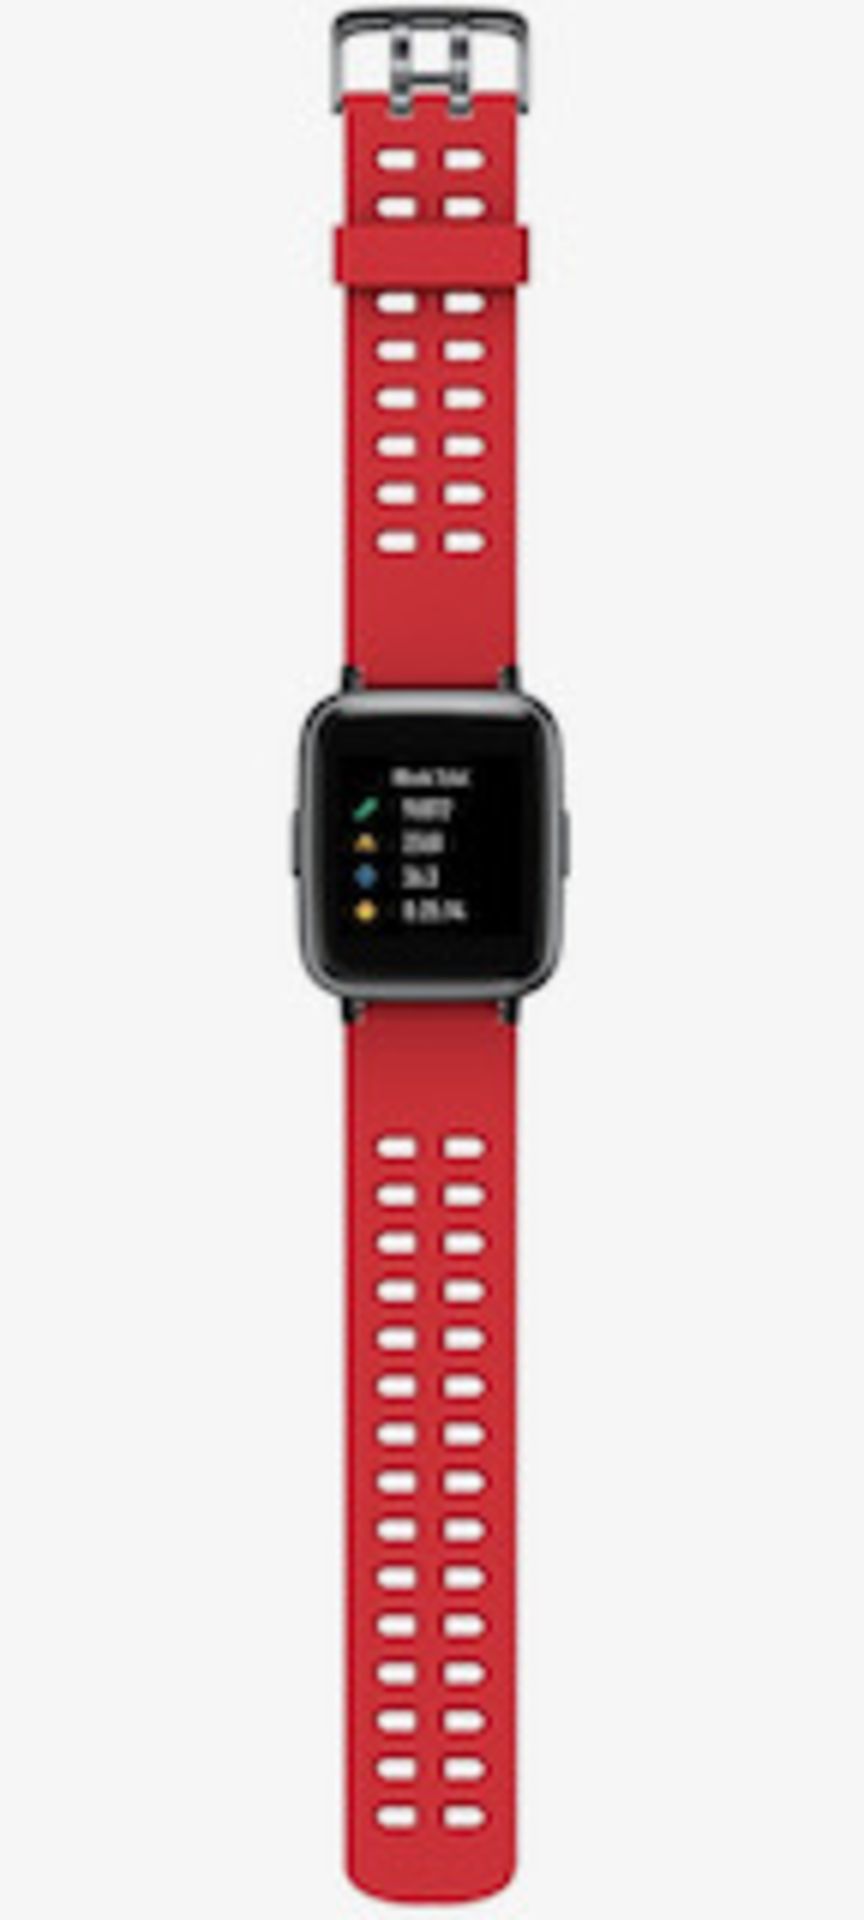 Brand New Unisex Fitness Tracker Watch Id205 Red Strap About This Item 1.3-Inch LCD Colour - Image 12 of 34